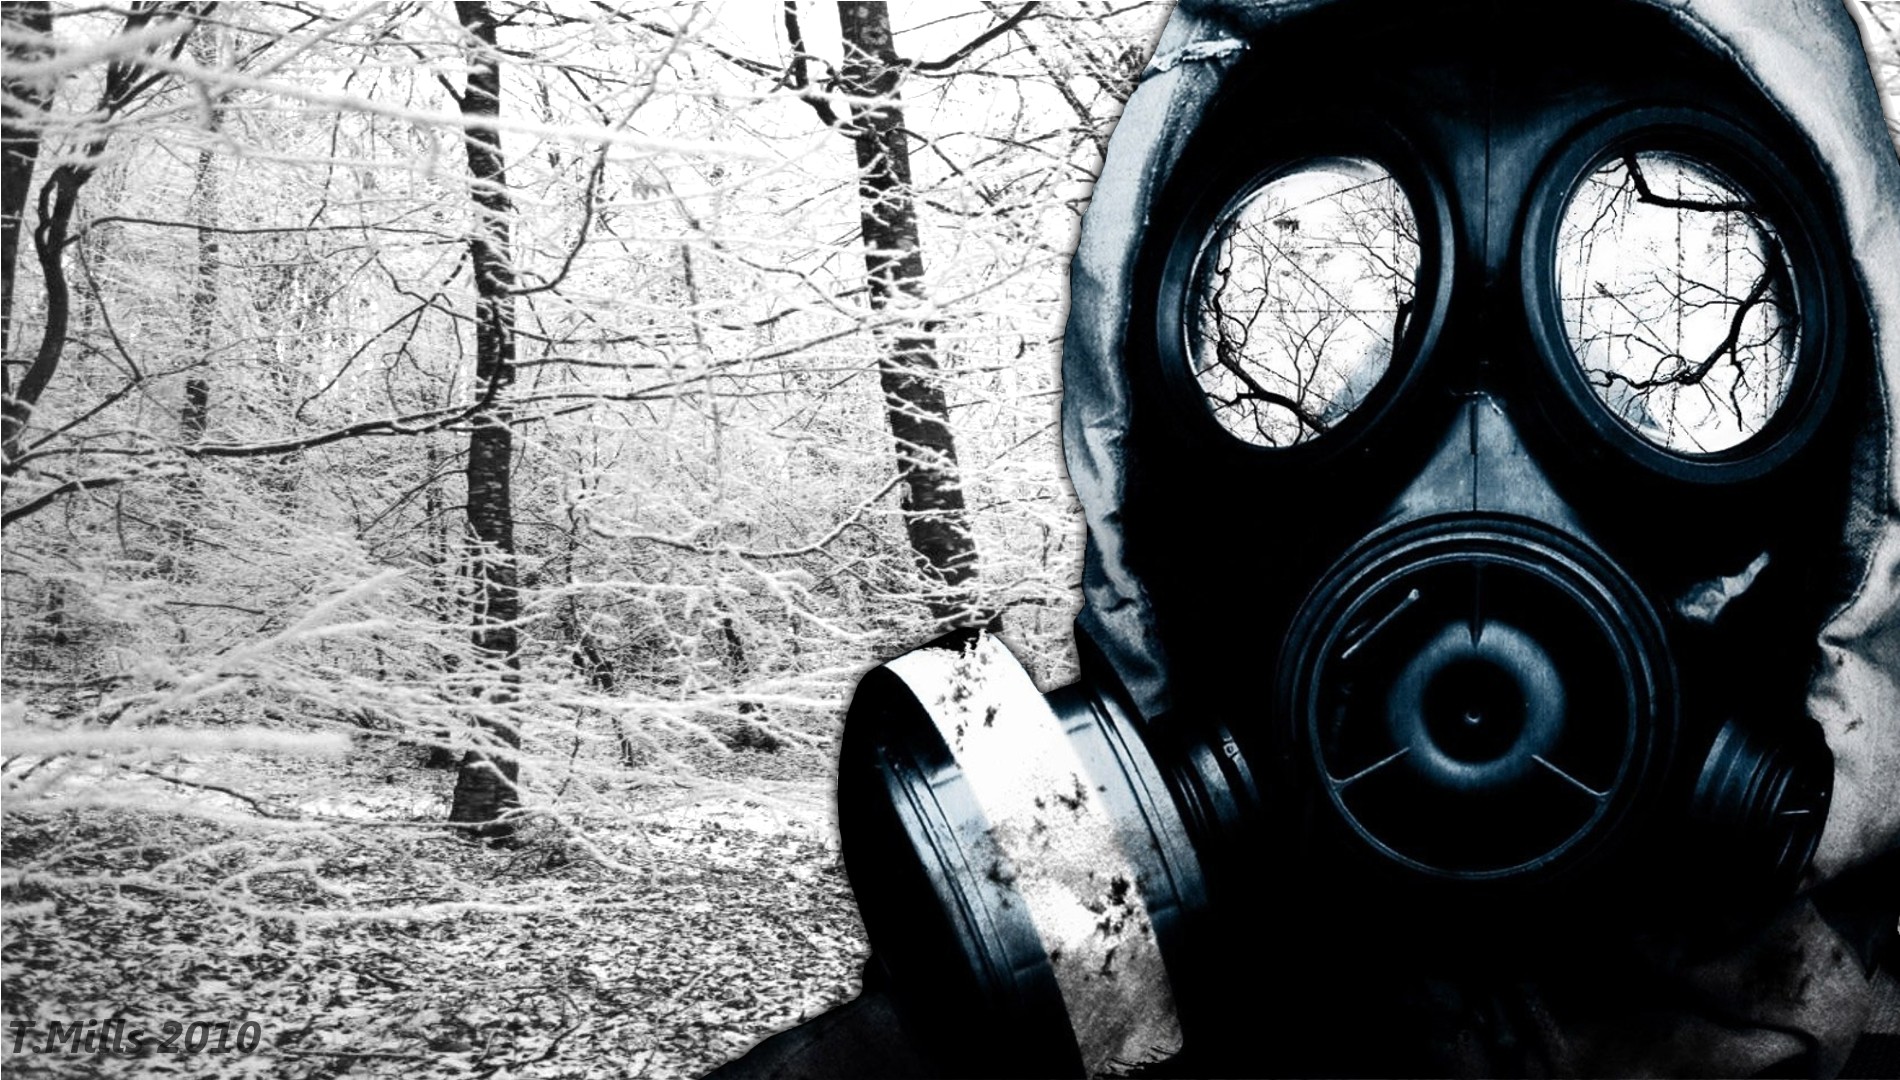 General 1900x1080 gas masks trees winter 2010 (Year) apocalyptic